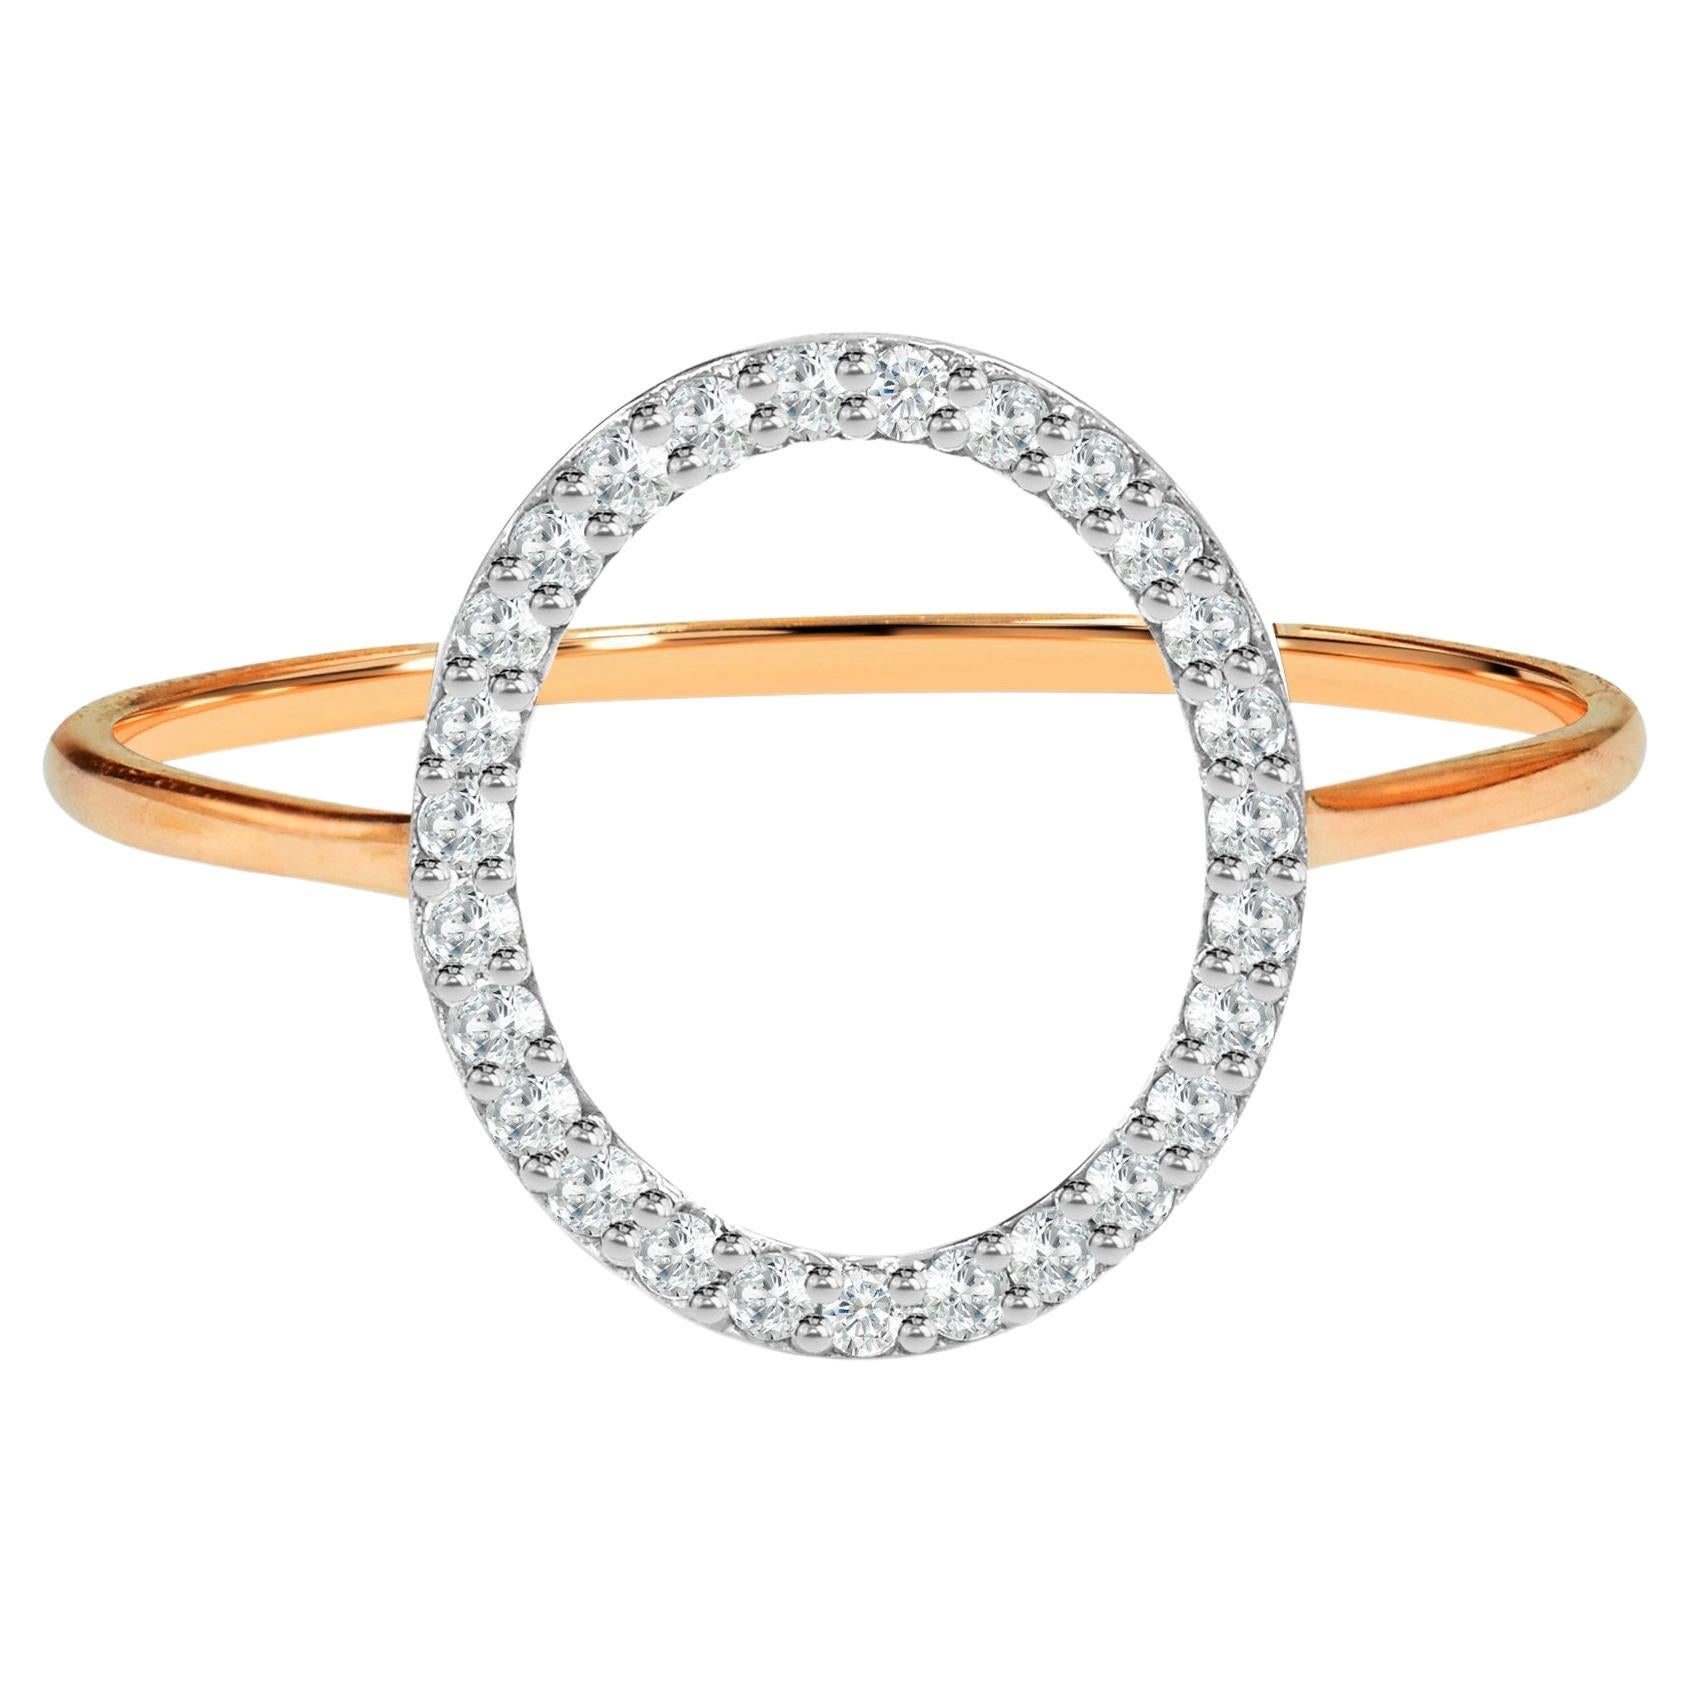 For Sale:  18K Gold Open Circle Diamond Ring Semi-Oval Proposal Ring